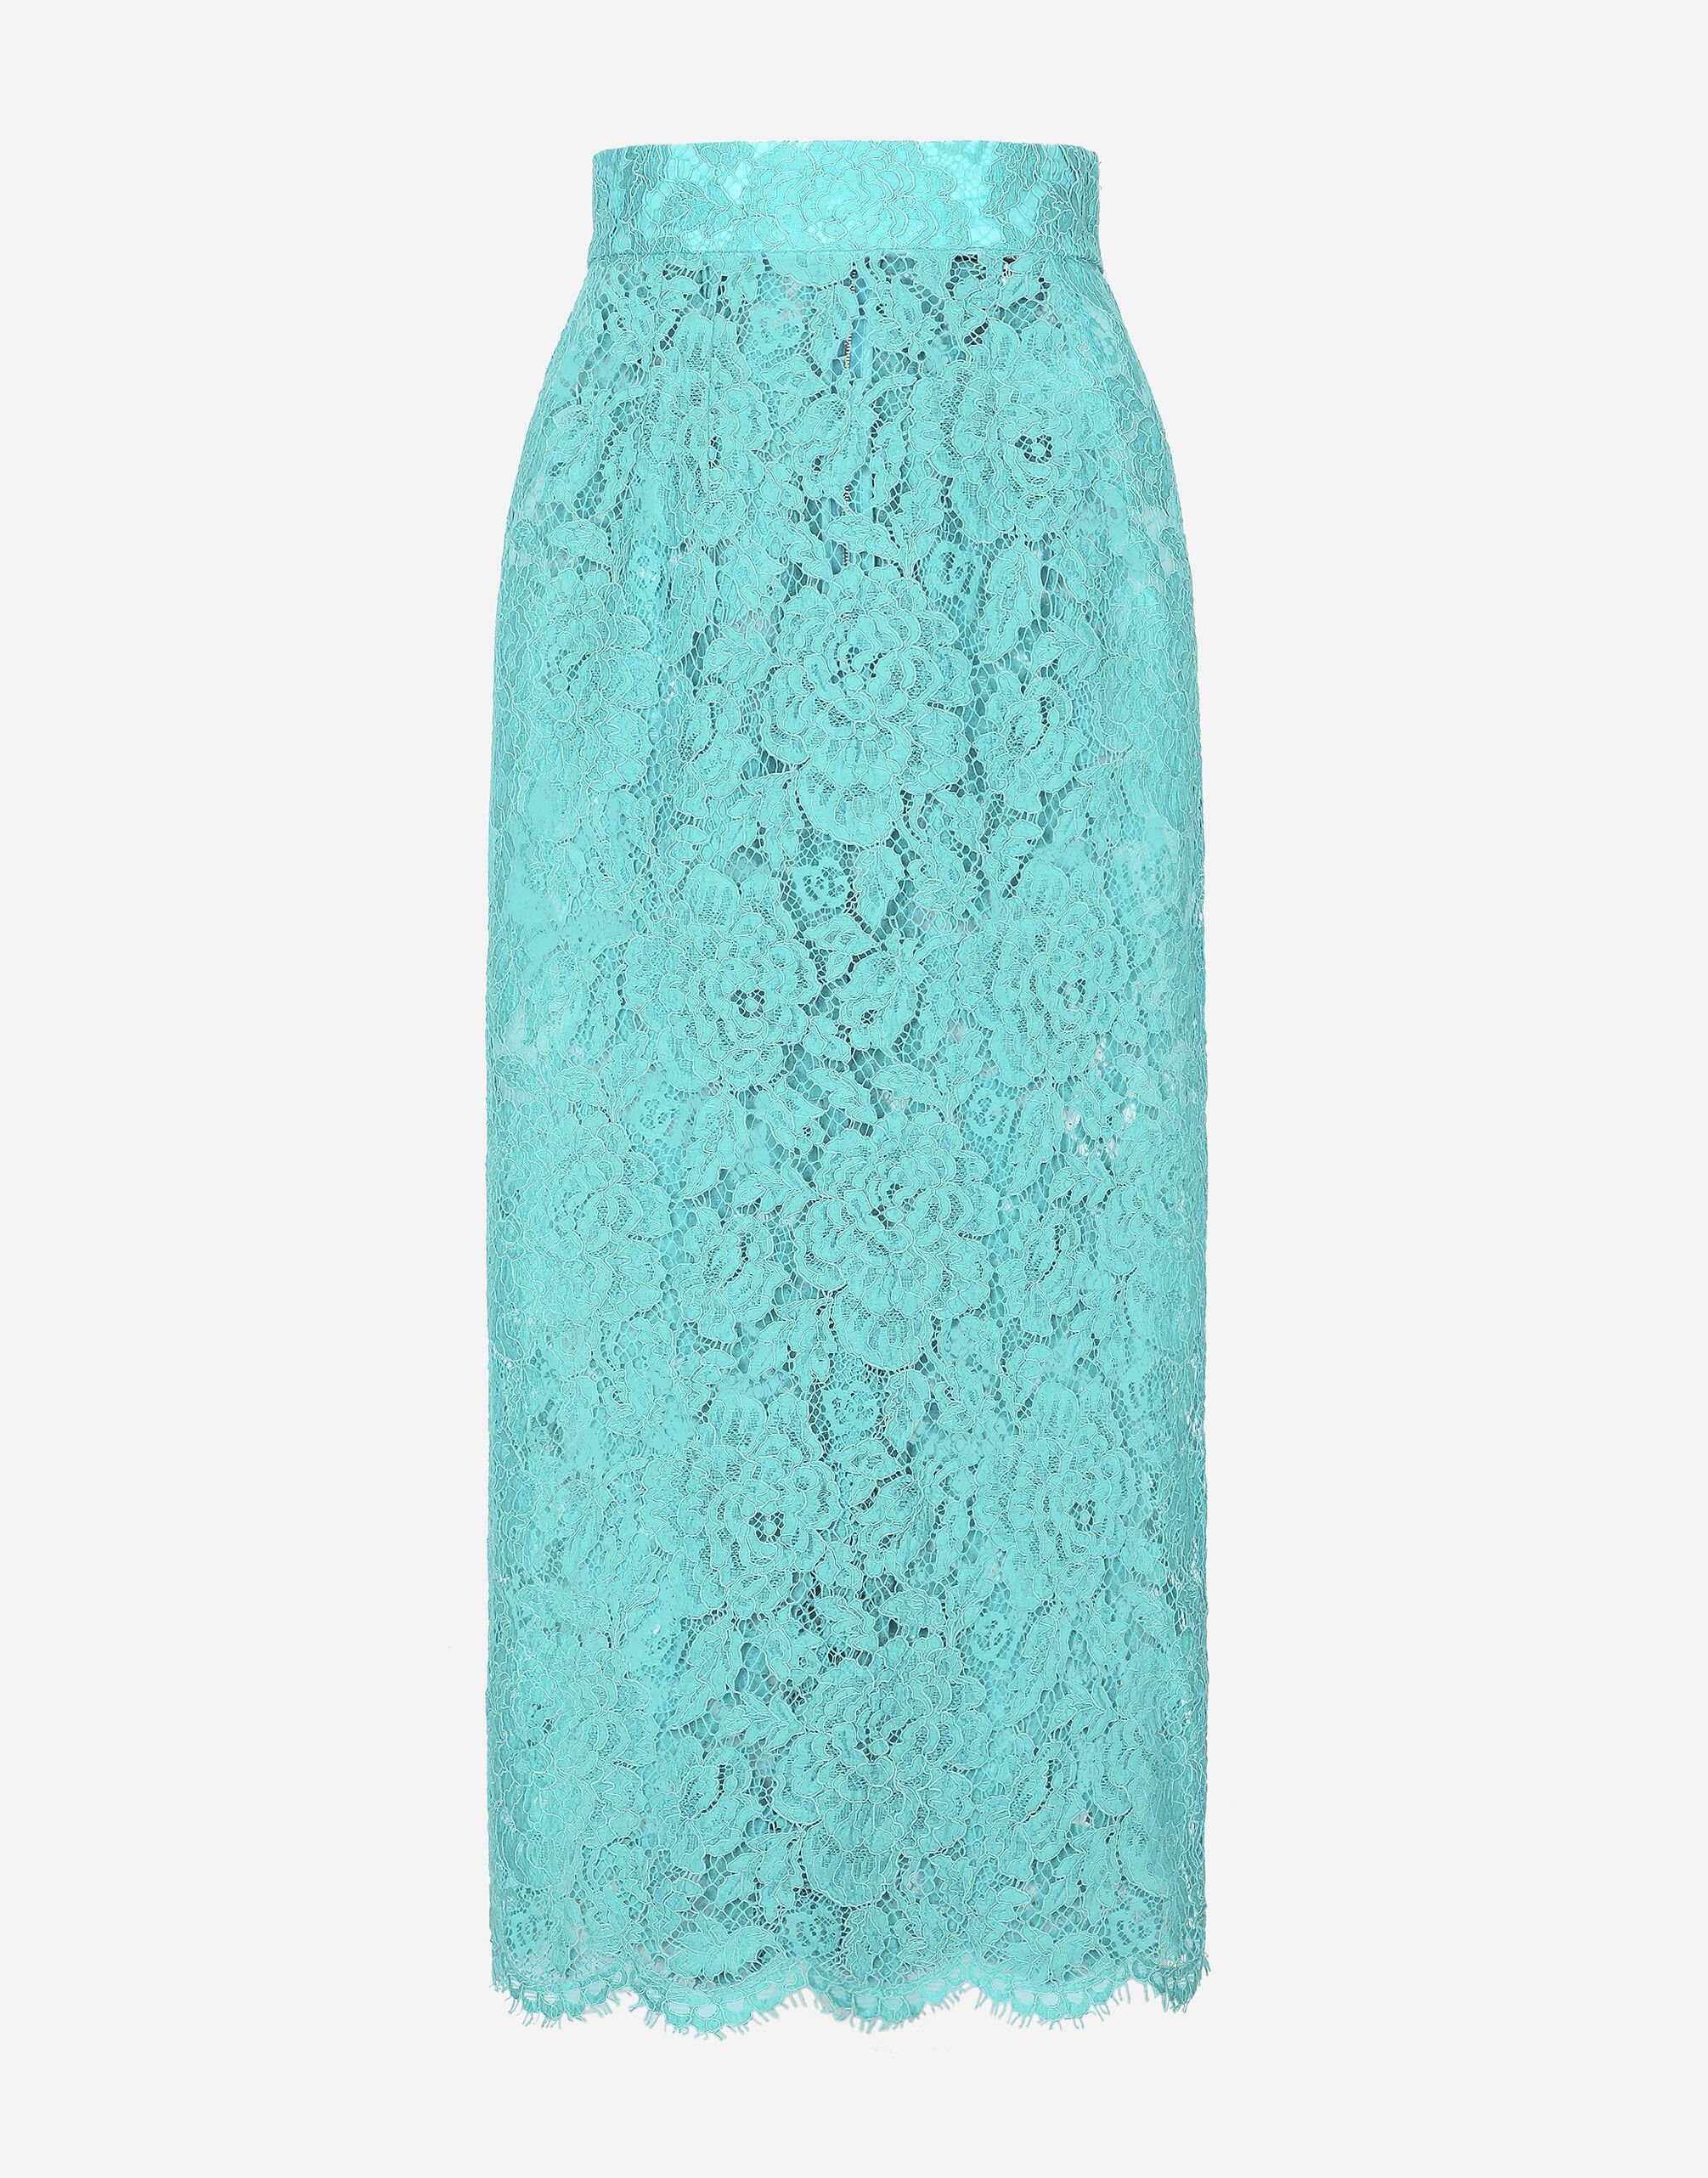 Branded floral cordonetto lace pencil skirt - 1